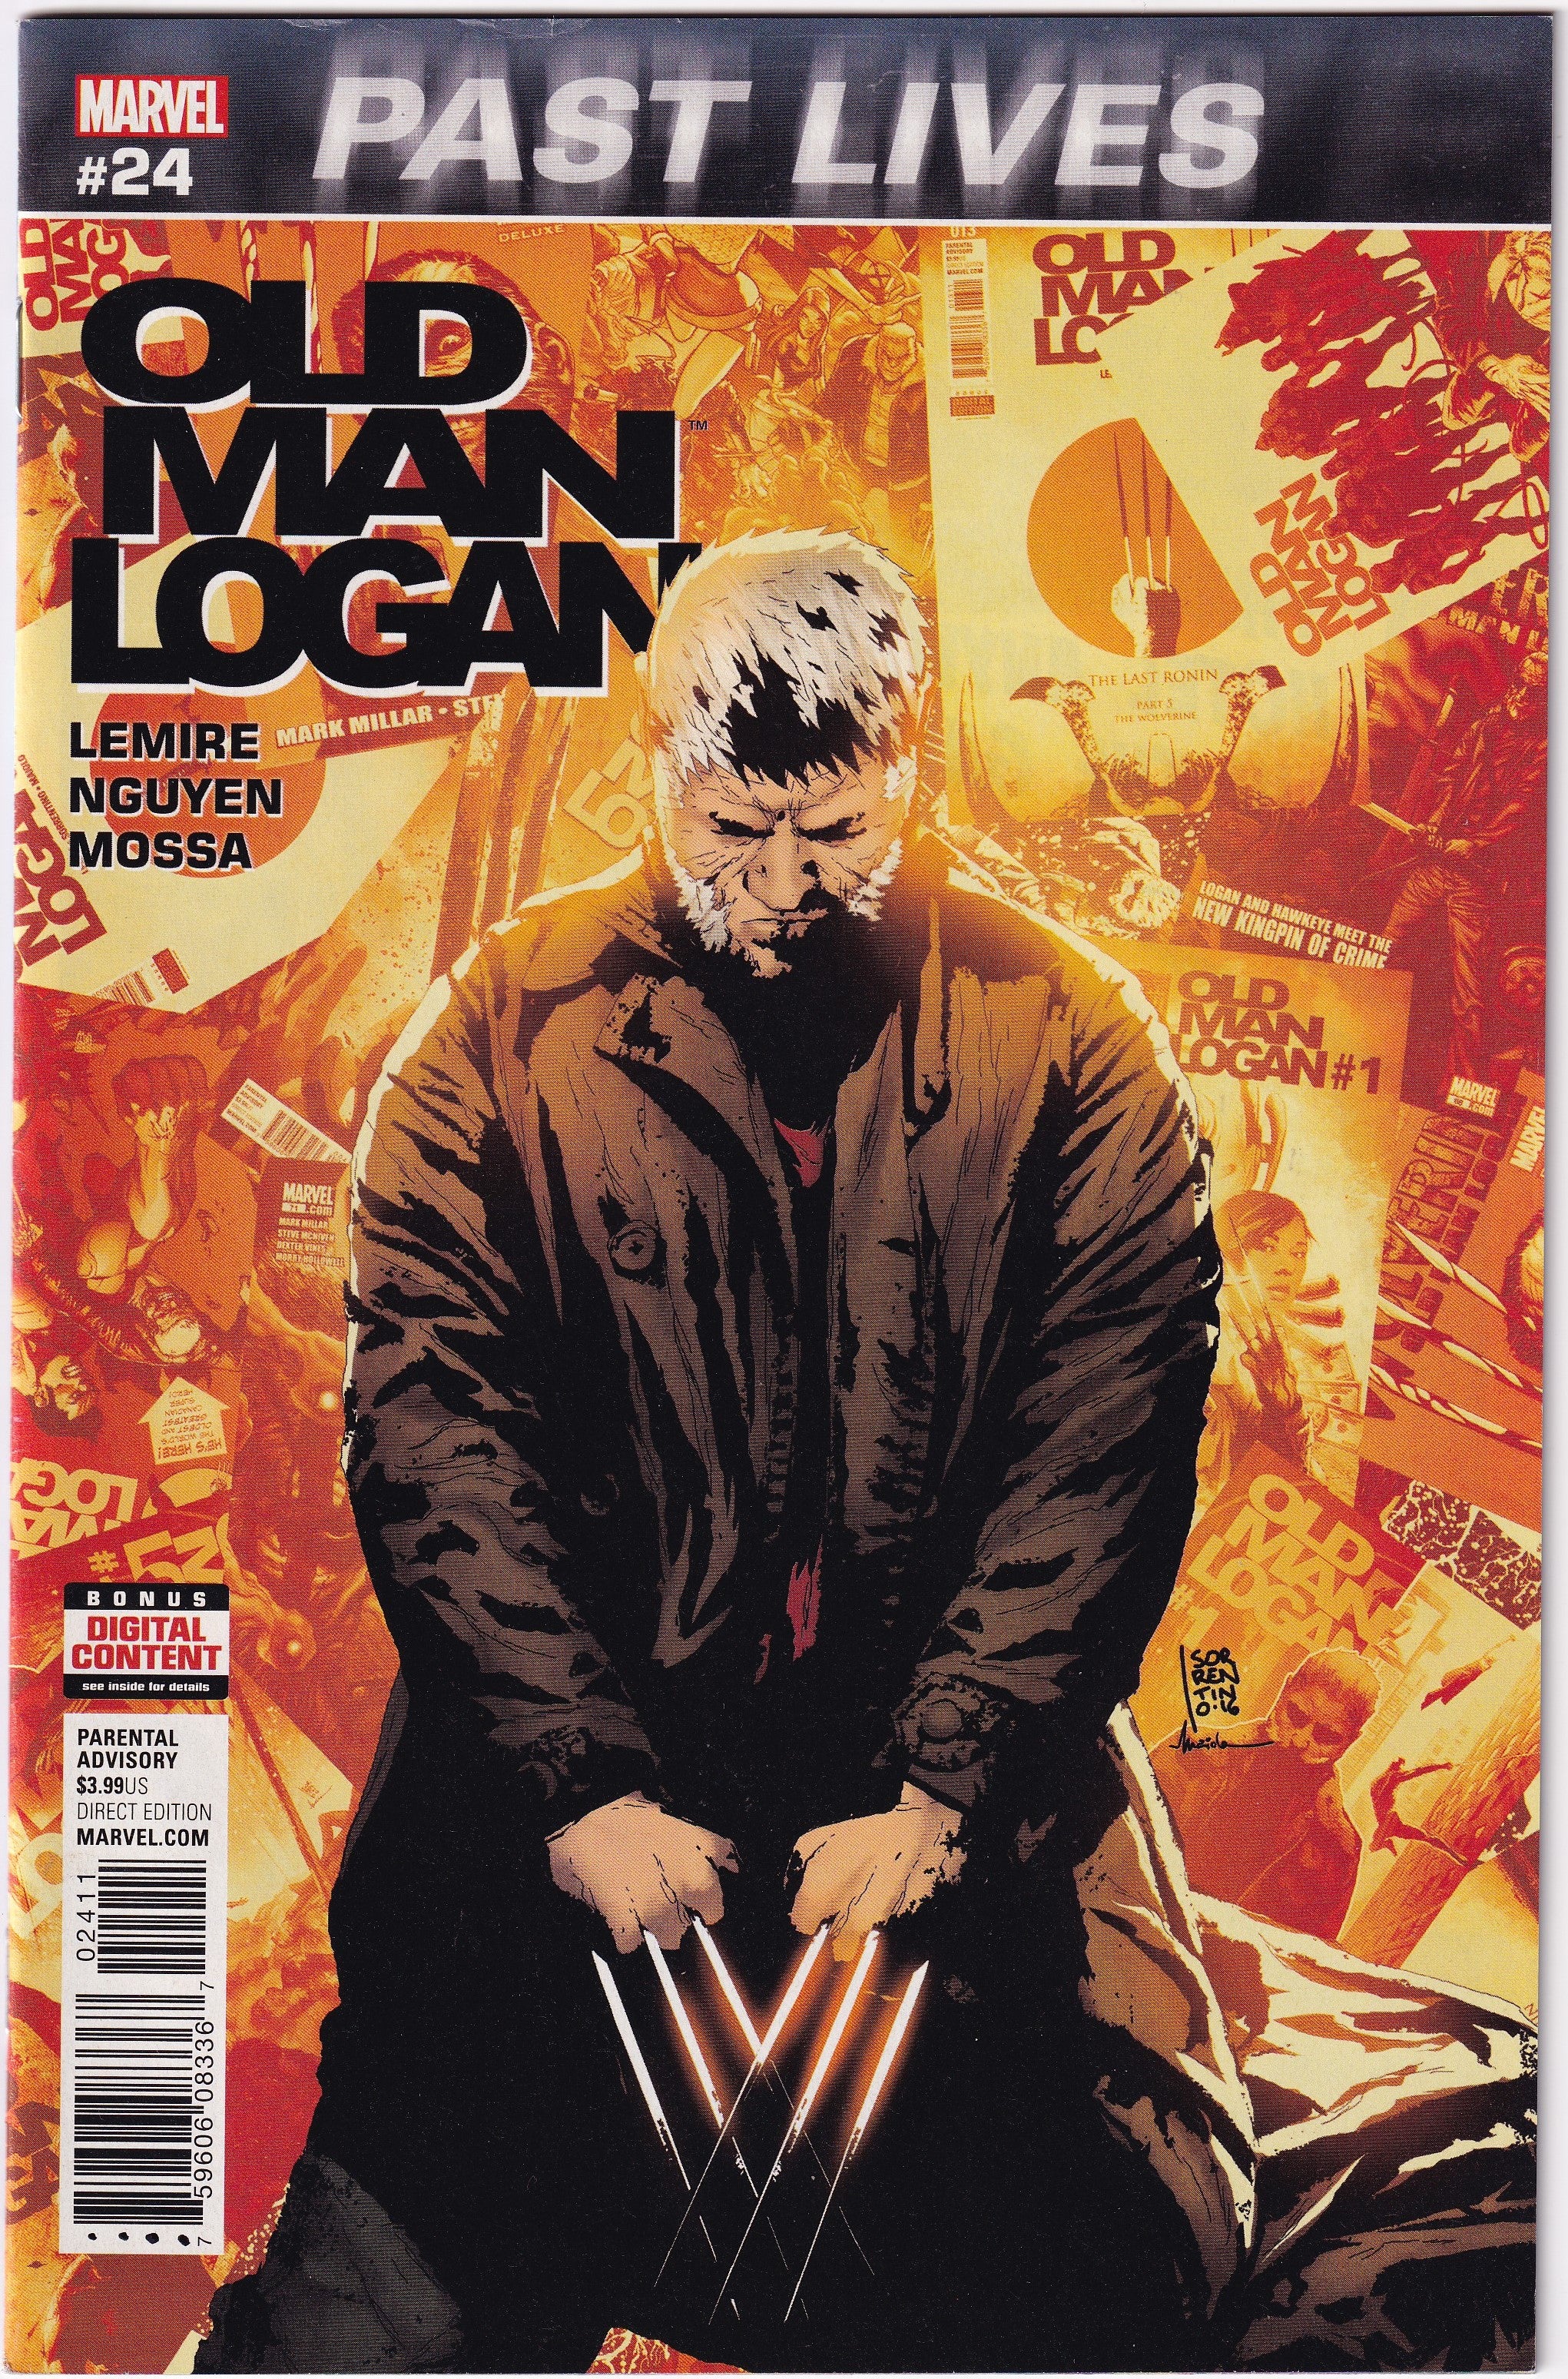 Photo of Old Man Logan V2 (17) 24A Jeff Lemire, Eric Nguyen Comic sold by Stronghold Collectibles